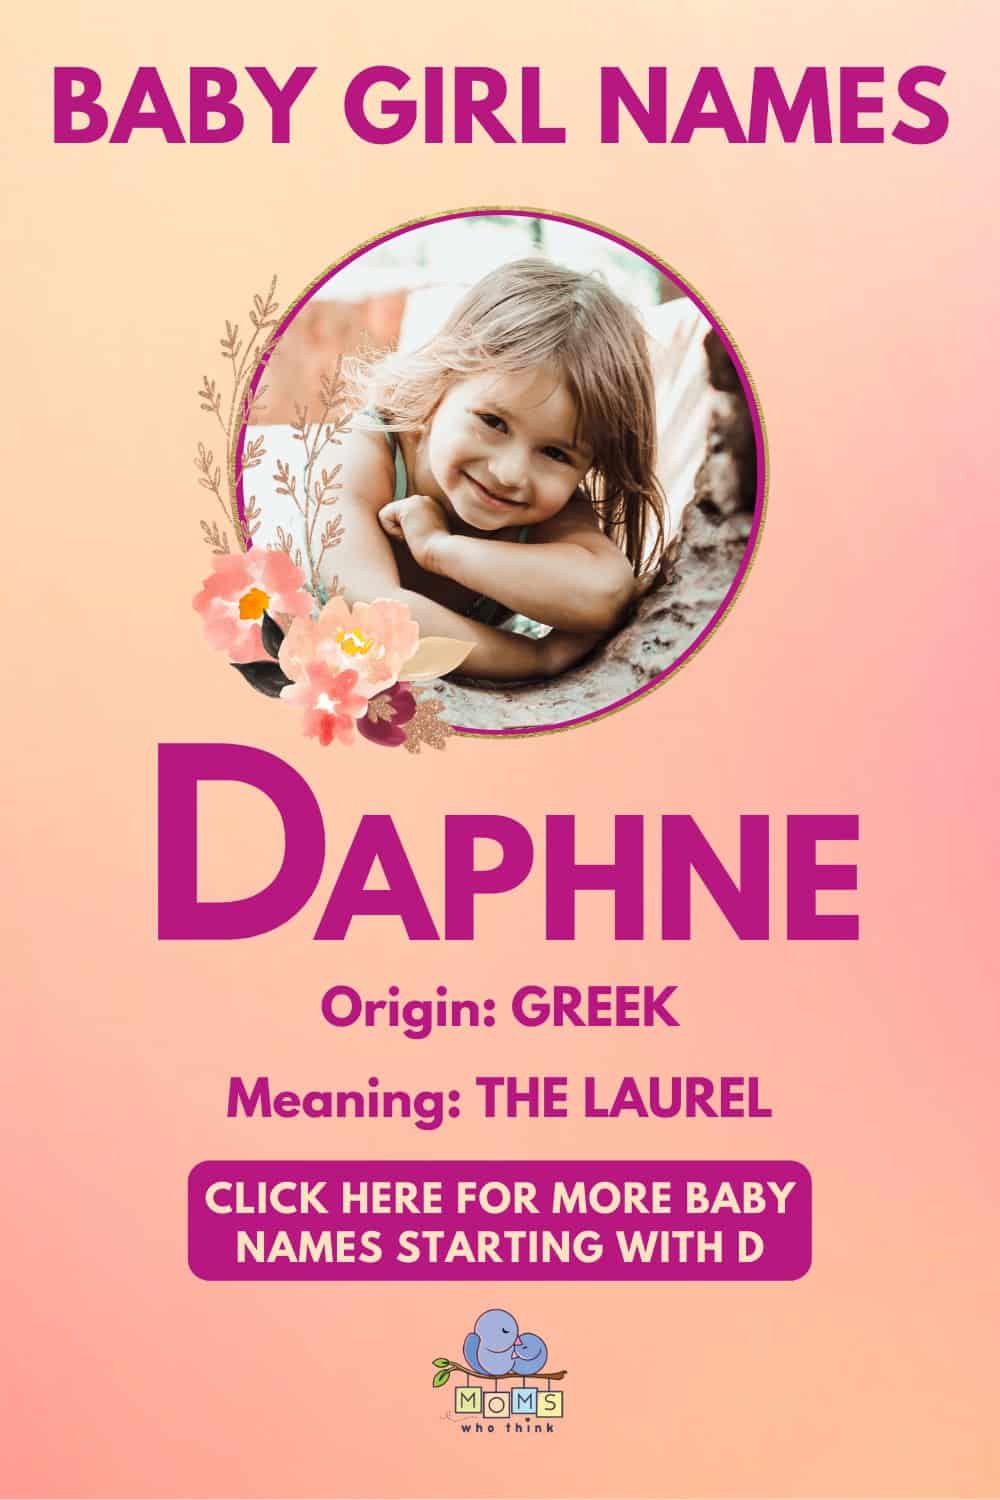 Baby girl name meanings - Daphne